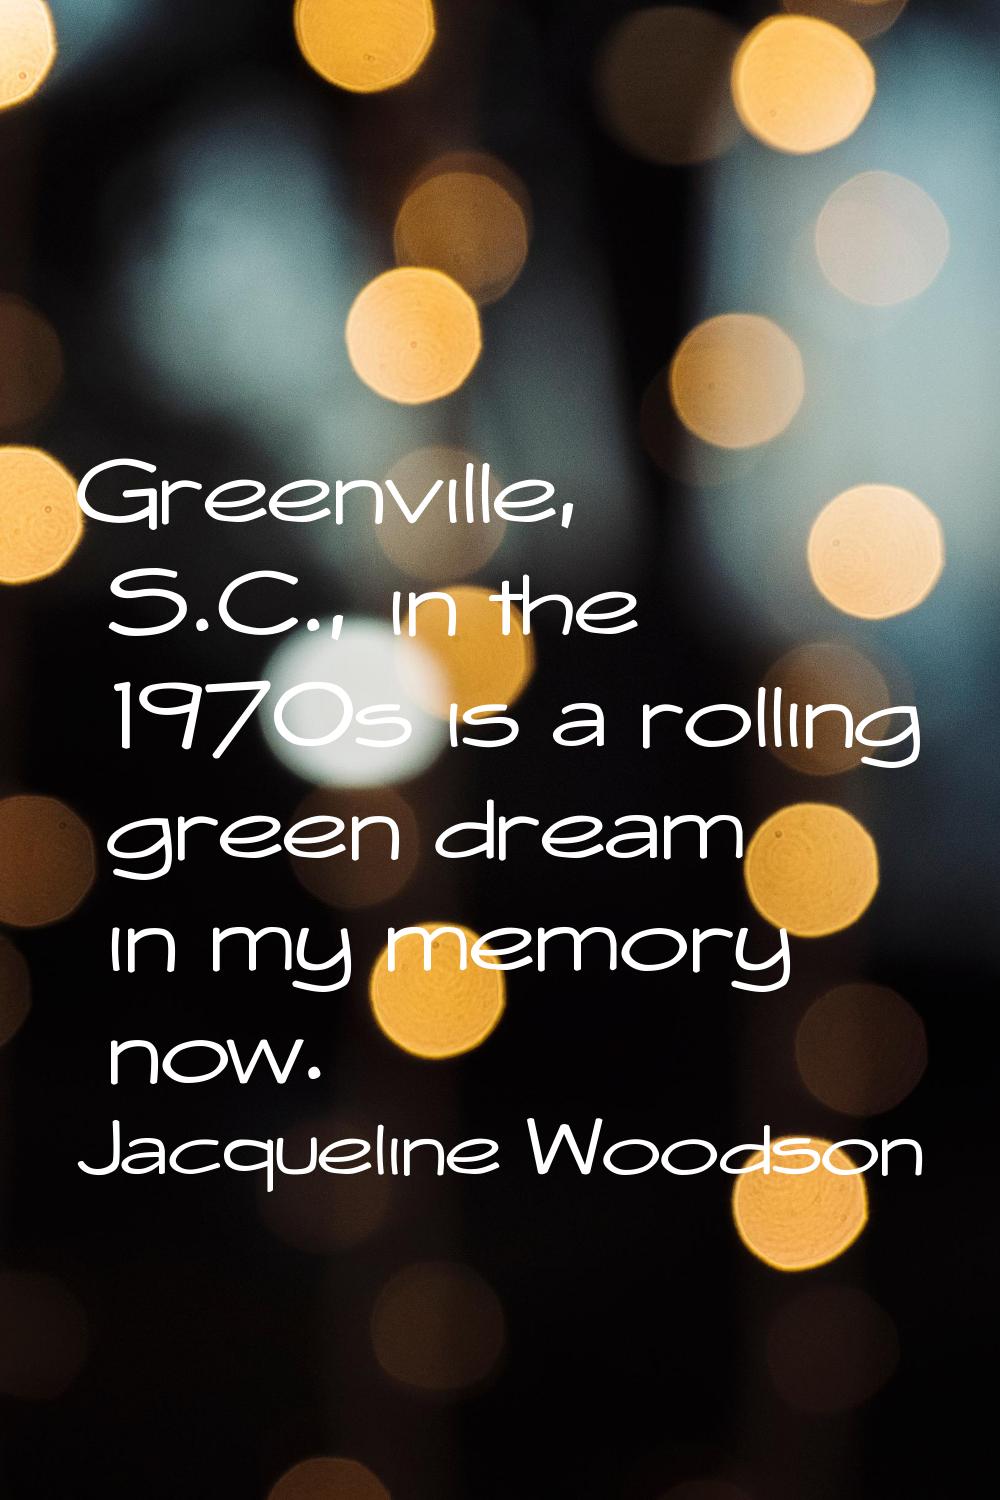 Greenville, S.C., in the 1970s is a rolling green dream in my memory now.